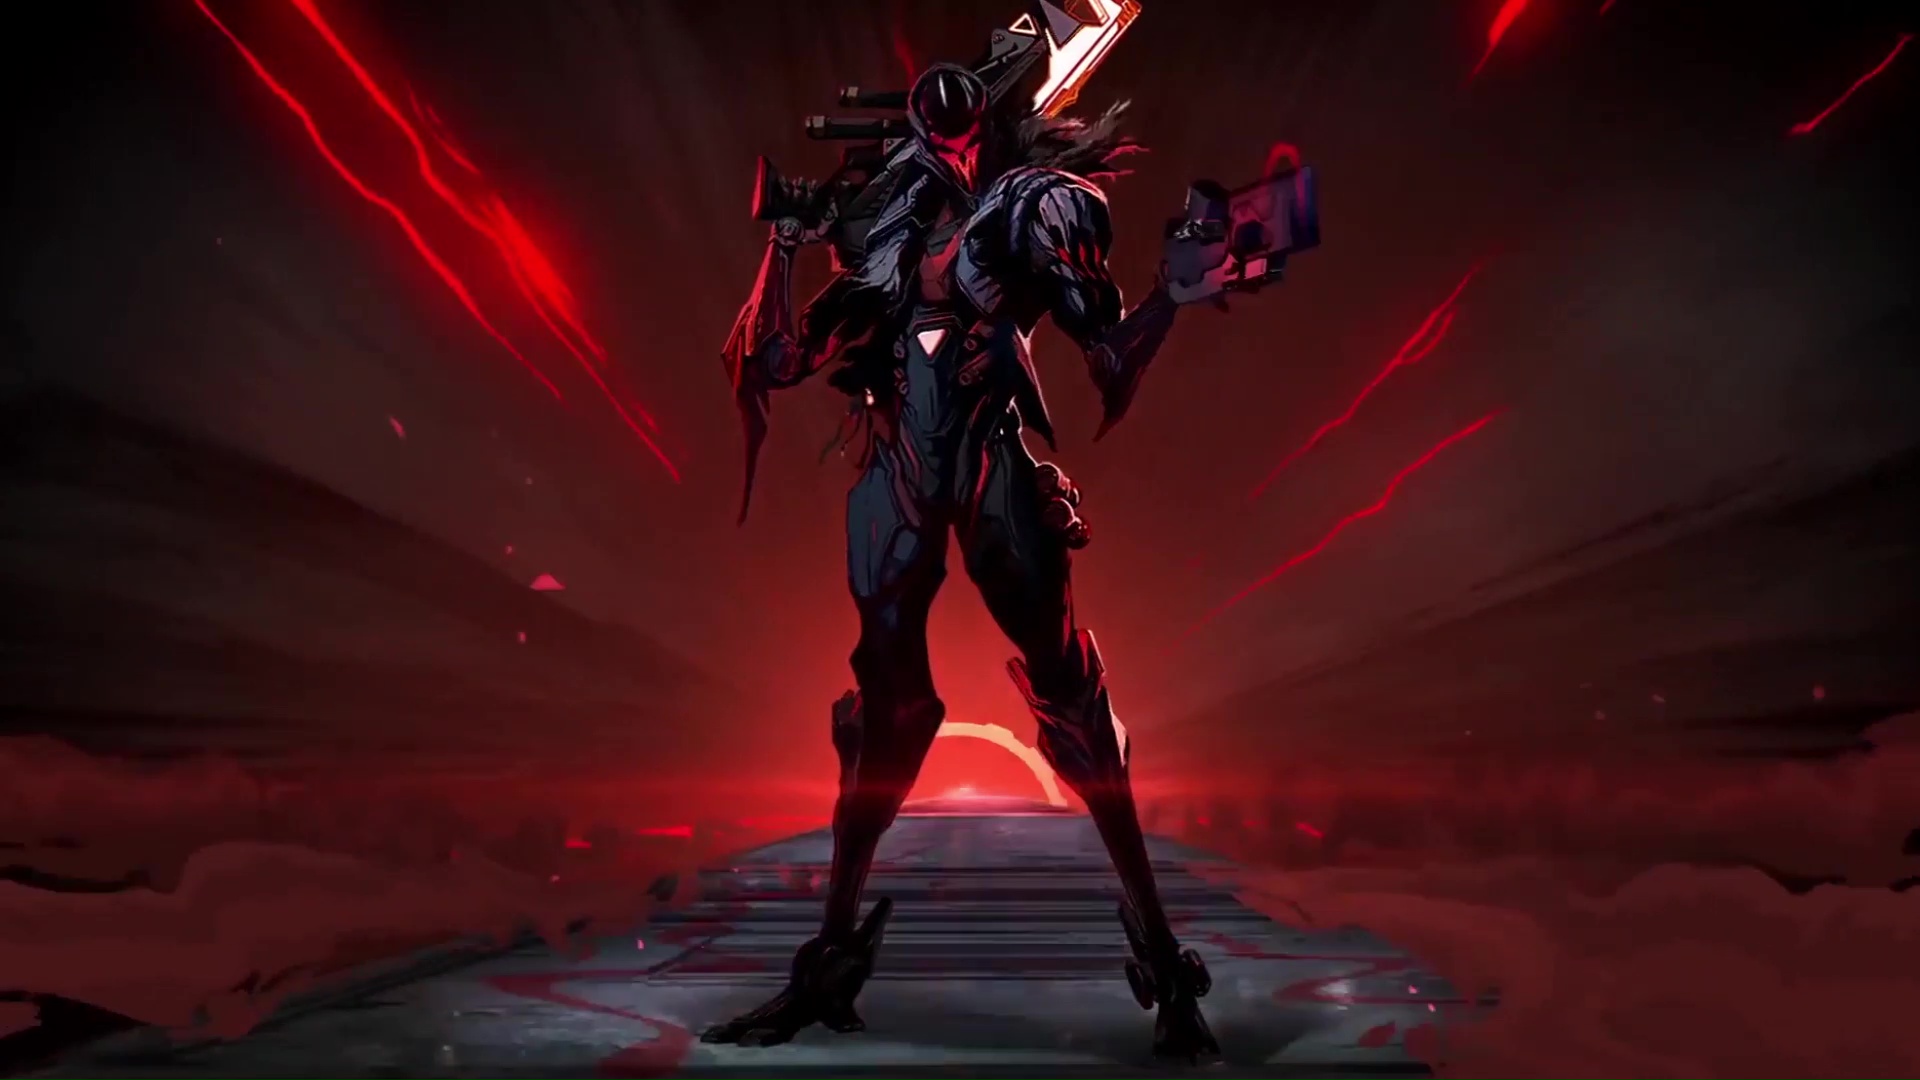 5 Jhin Live Wallpapers, Animated Wallpapers - MoeWalls